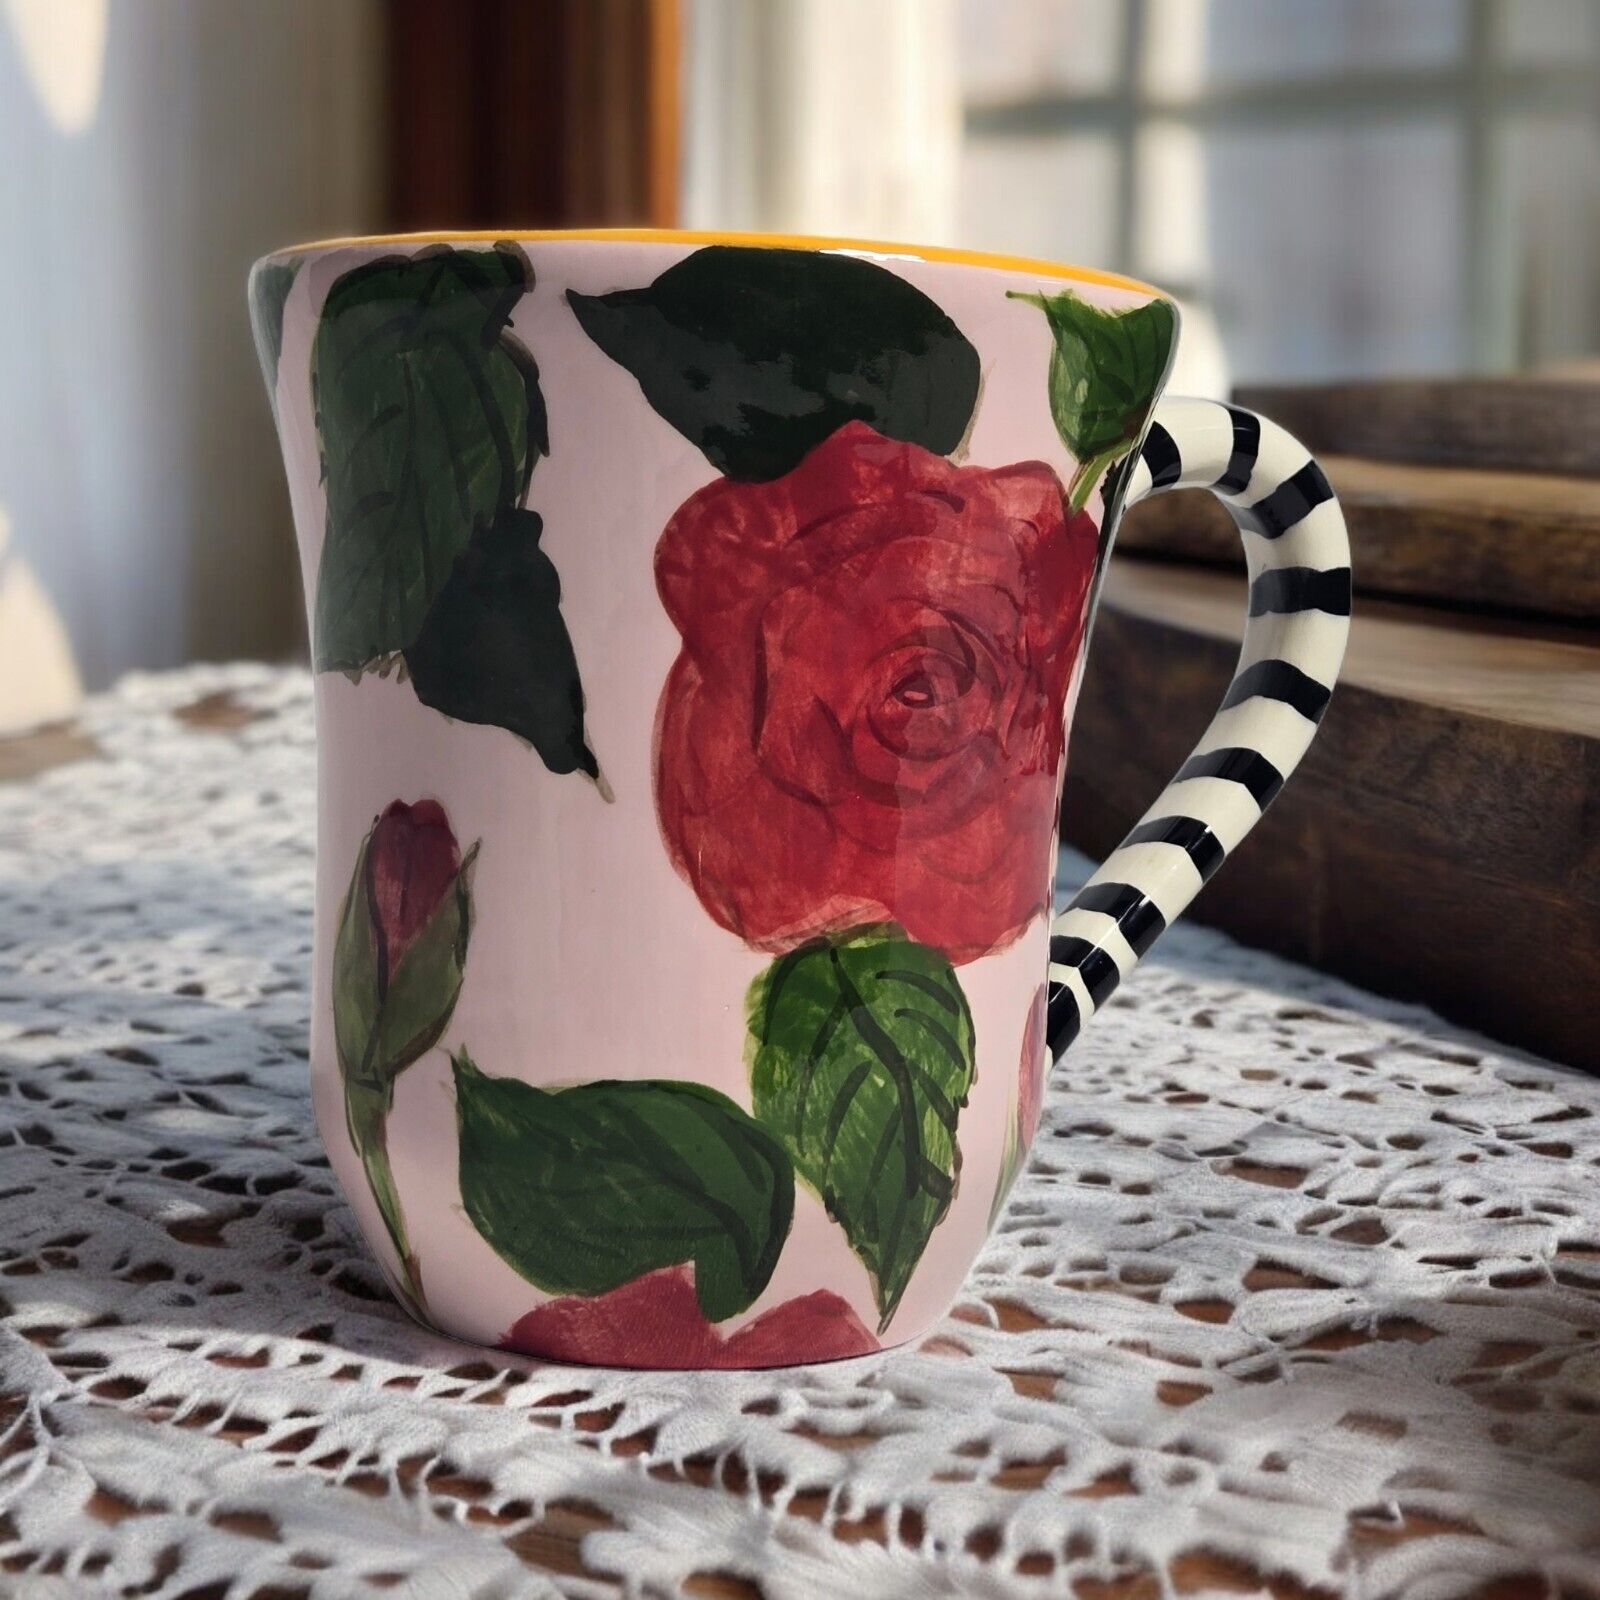 DROLL DESIGNS Hand Painted Coffee Mug Cup - Rose Striped Handle Yellow Inside